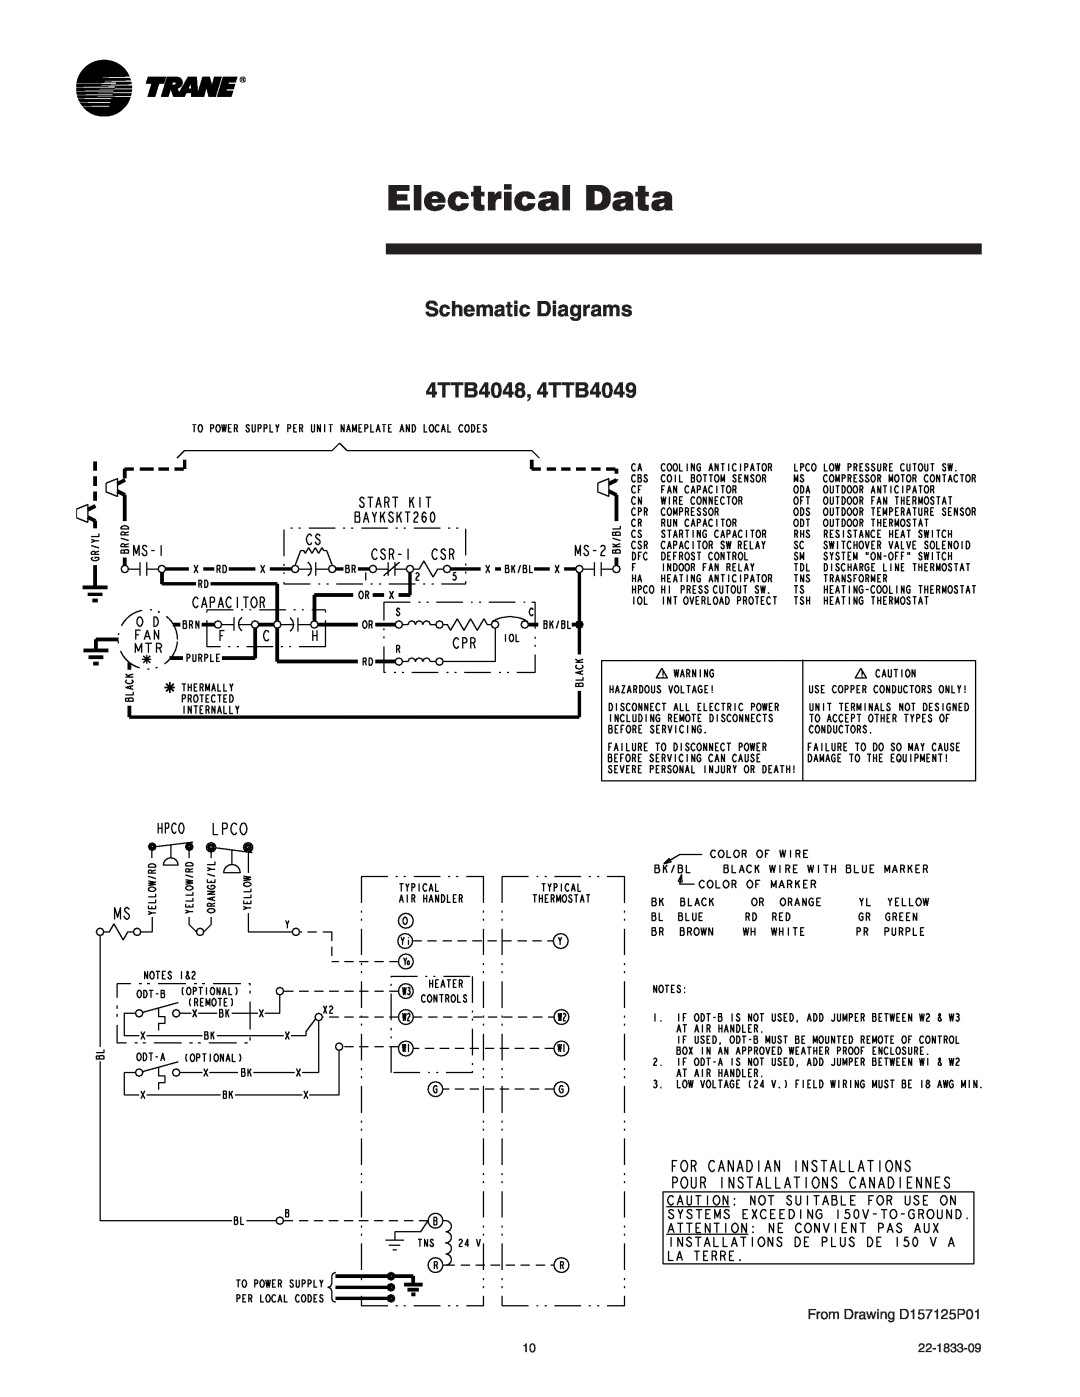 Trane manual Electrical Data, Schematic Diagrams 4TTB4048, 4TTB4049, From Drawing D157125P01 